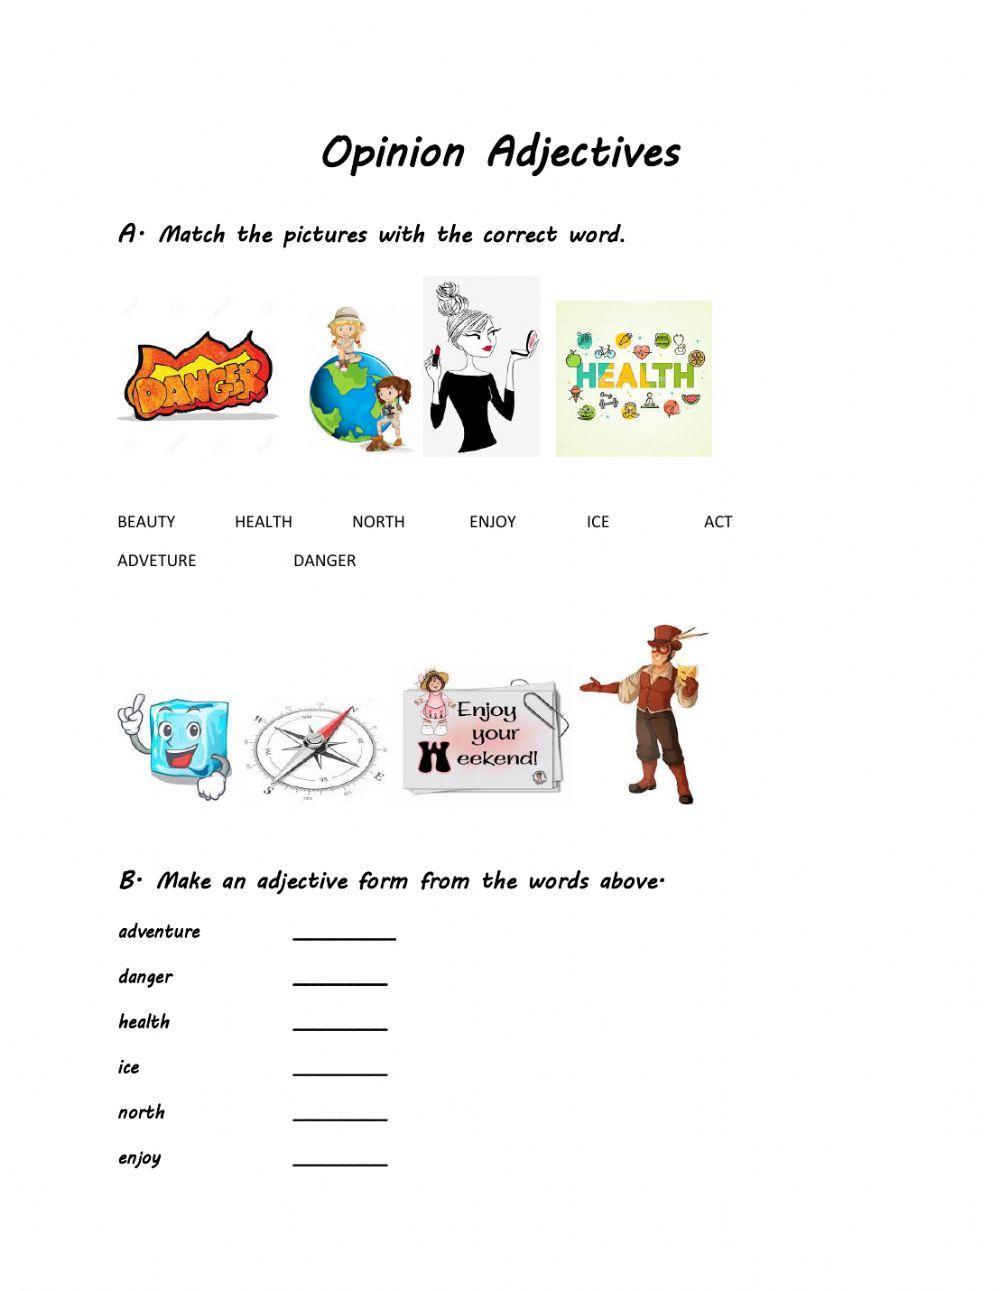 Opinion Adjectives